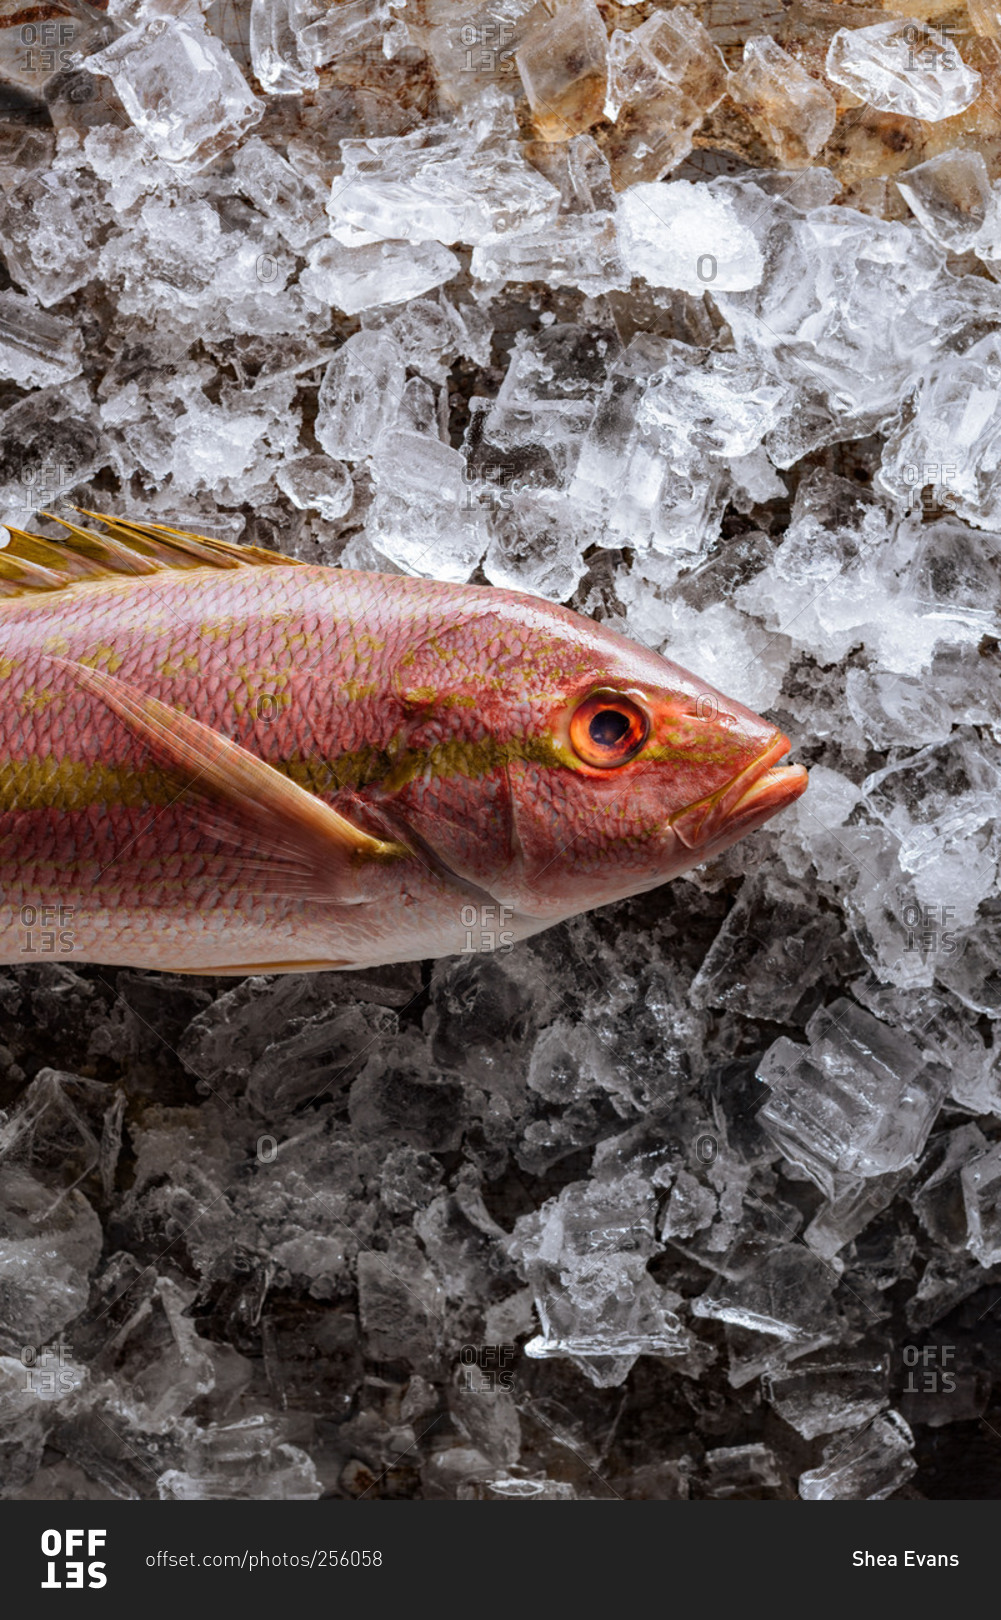 Red snapper fish on ice